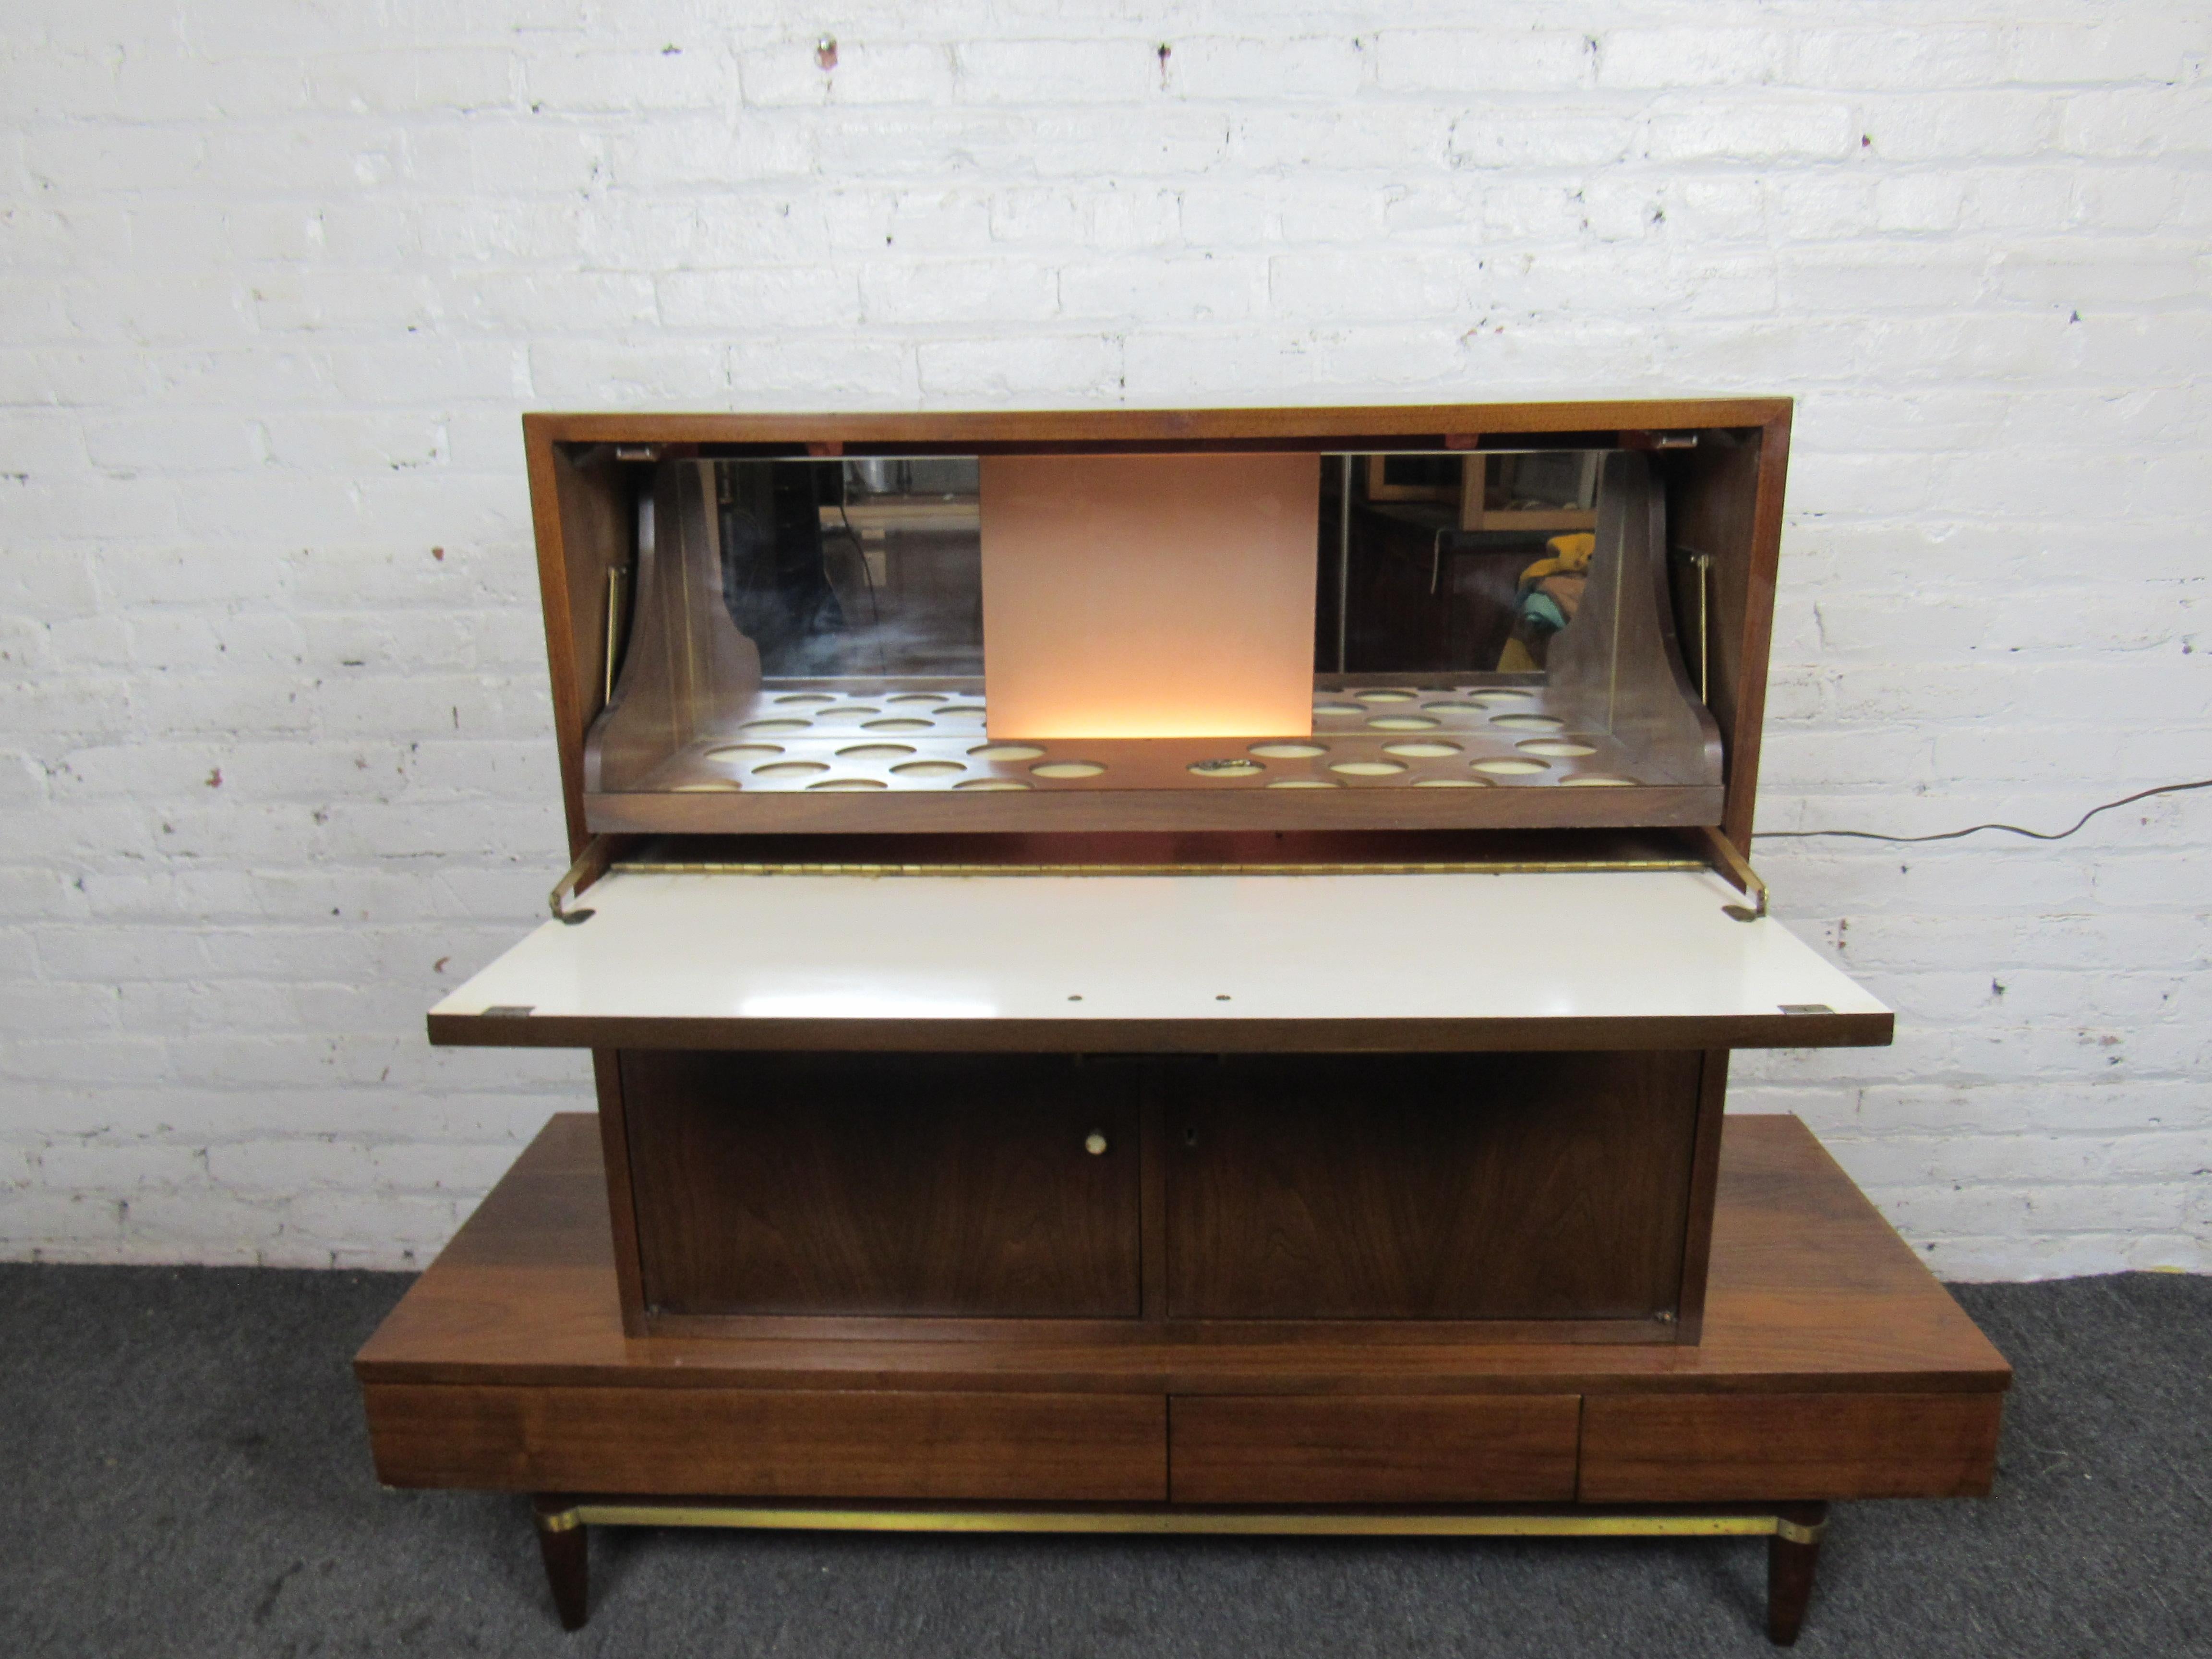 This incredible dry bar cabinet by Martinsville is a Mid-Century Modern gem, with a large top compartment that lights up with holders for drinks. A lower storage compartment and slide out drawers at the bottom allow for storage and organization of